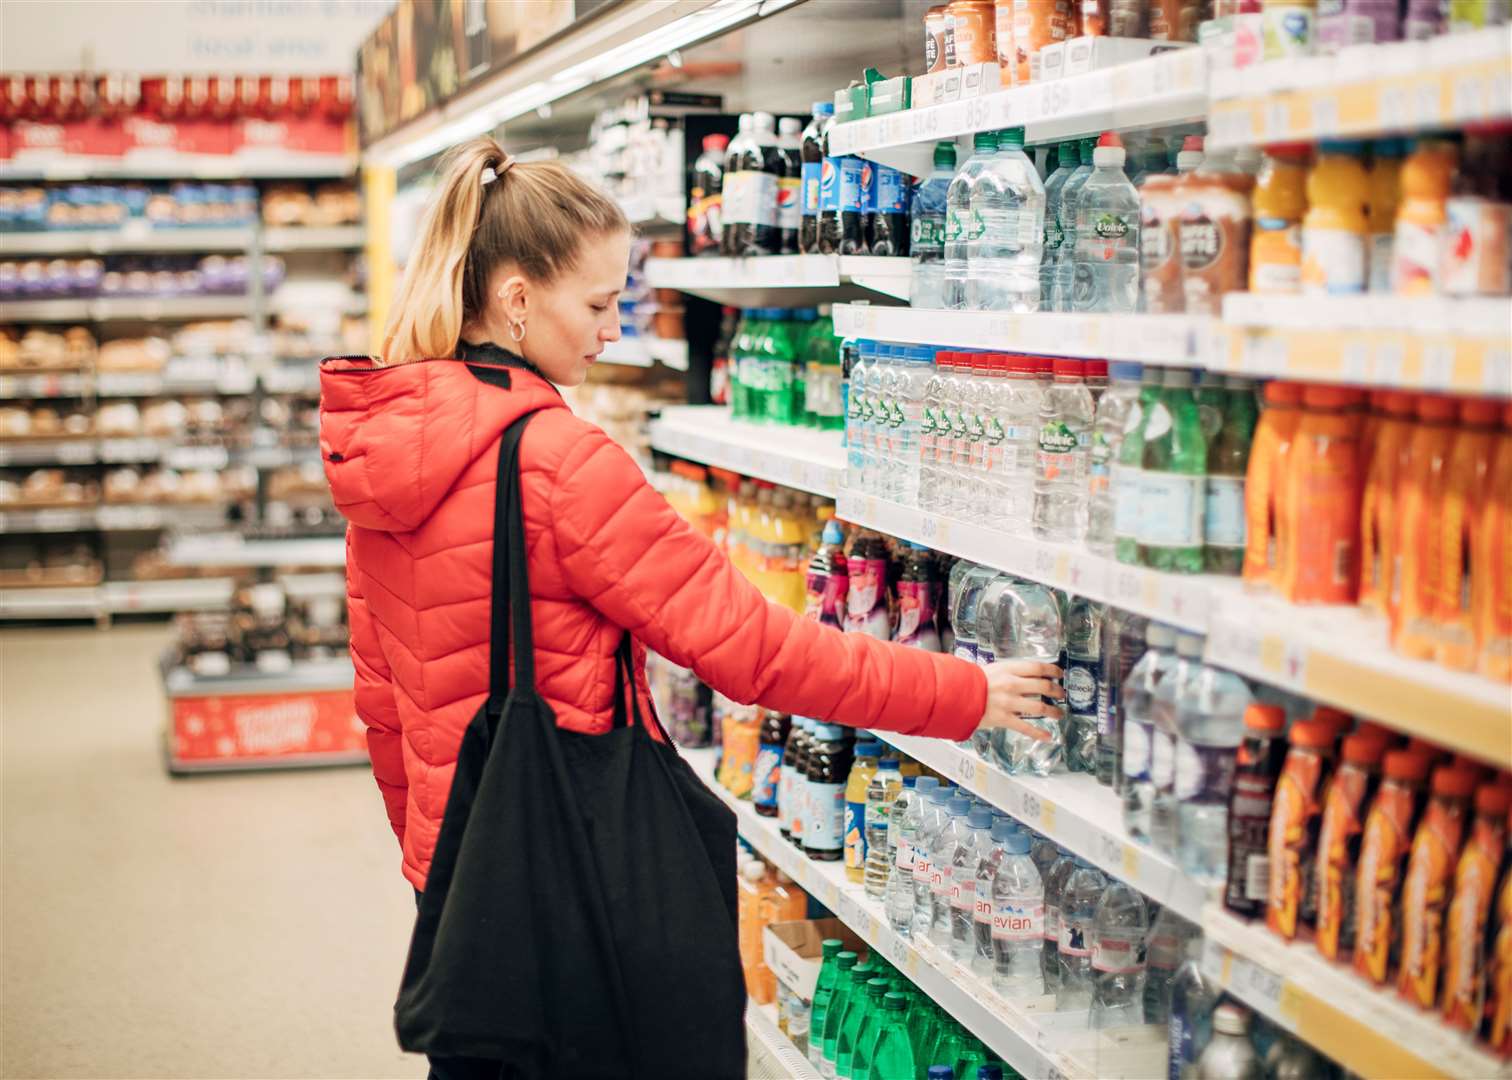 Unite says shortages and empty shelves may occur as a result of the week-long strike. Image: iStock.